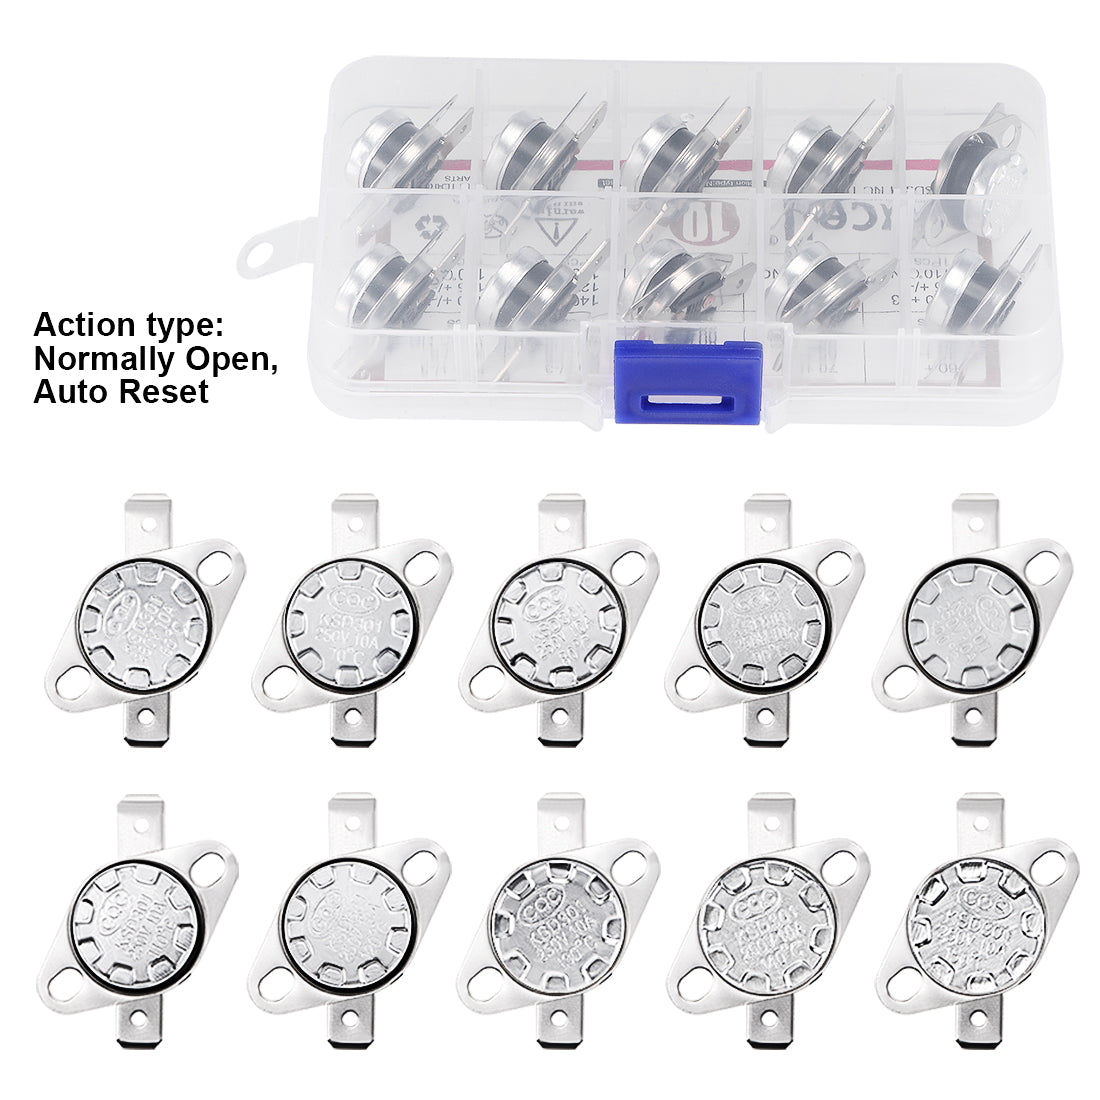 uxcell Uxcell 10pcs NO KSD301 Thermostat 60-150°C(140-302℉) Temperature Thermal Control Switch 60 70 80 90 100 110 120 130 140 150°C Normally Open Assortment Kit